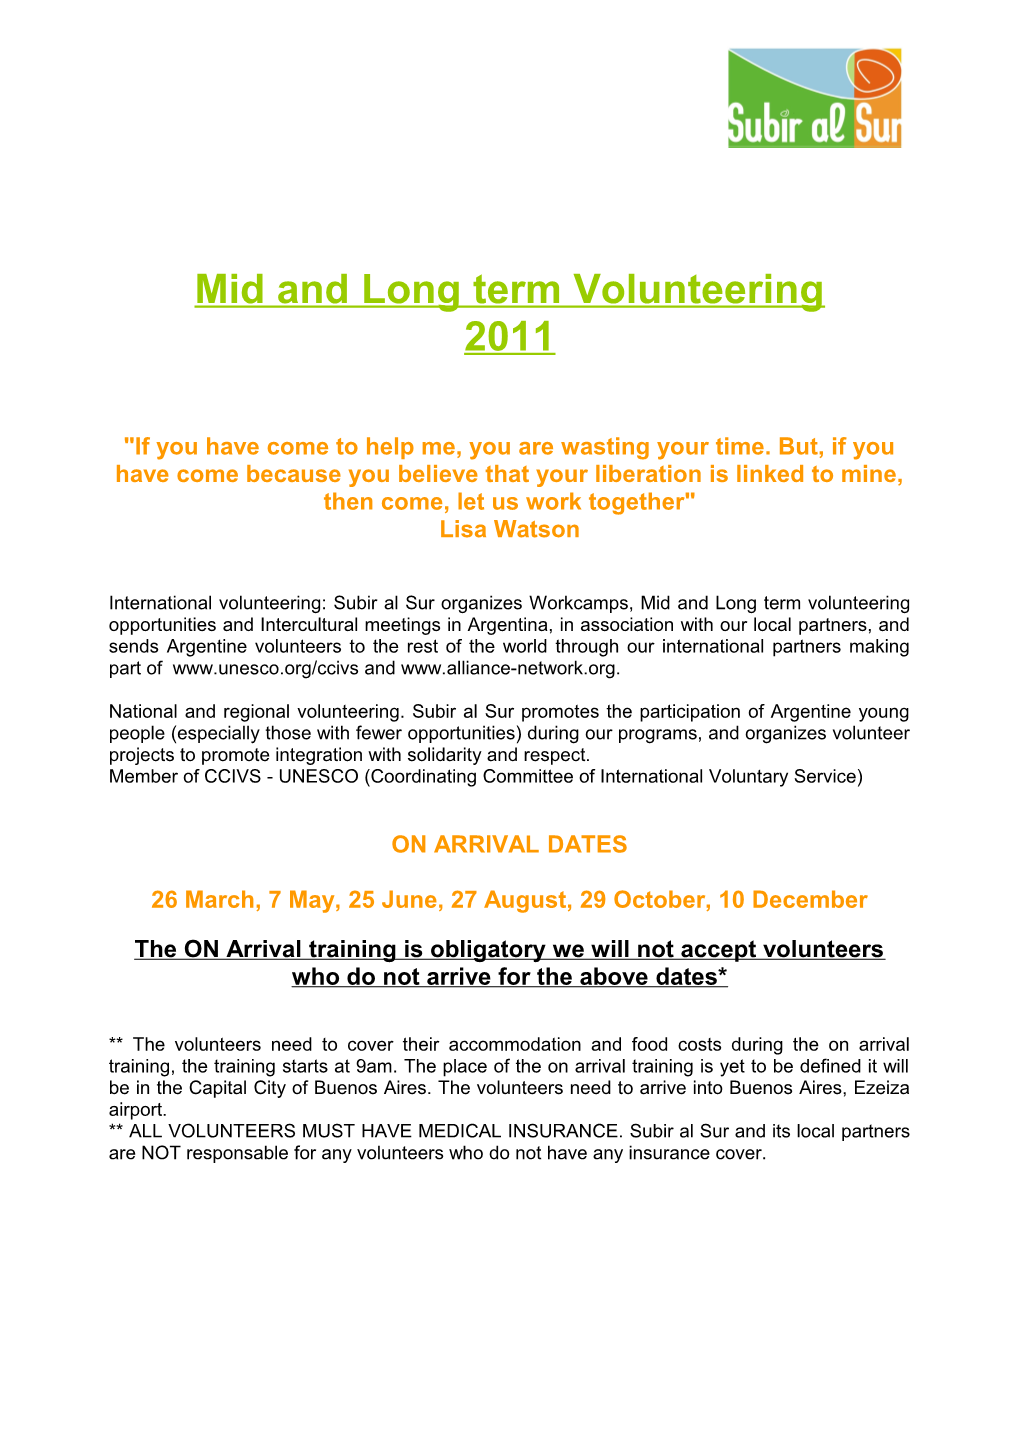 Mid and Long Term Volunteering